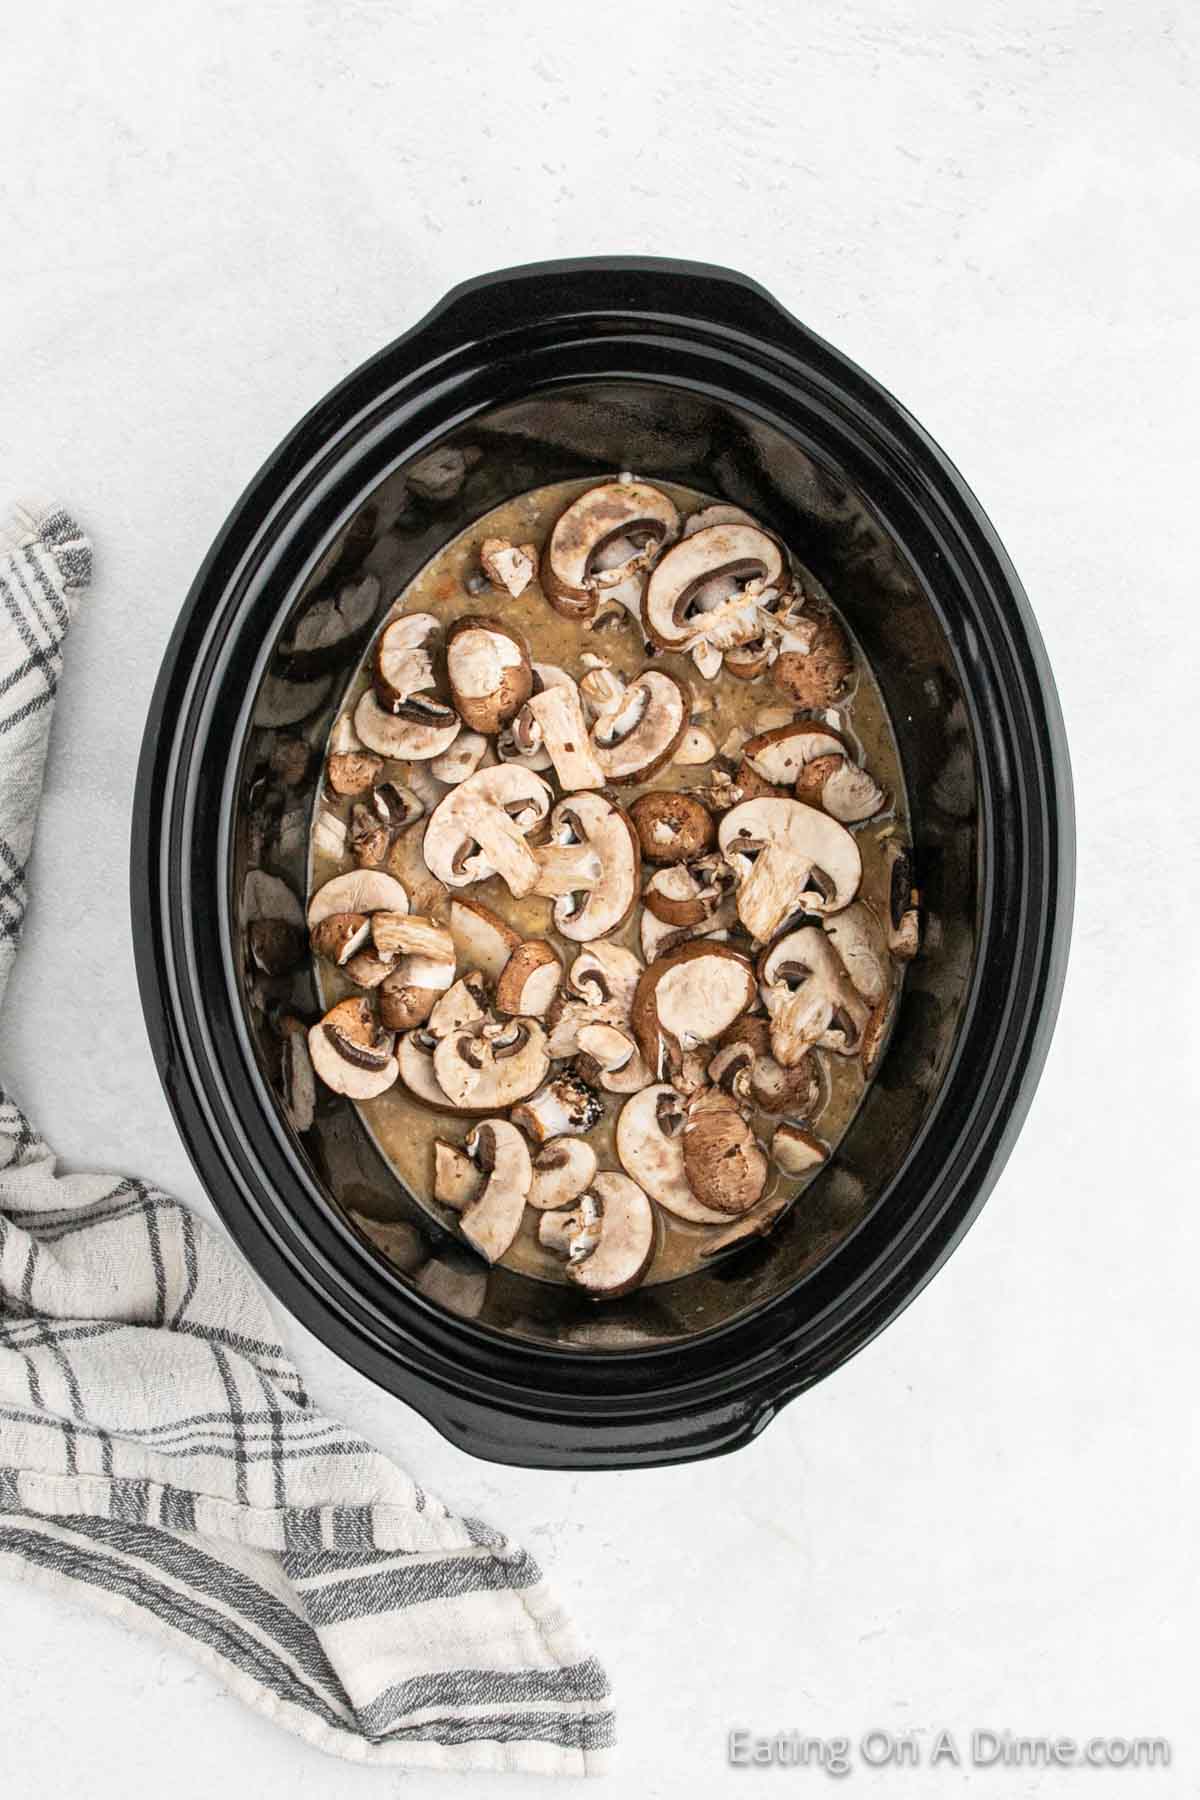 Topping slice mushrooms over the chicken and sauce mixture in the slow cooker